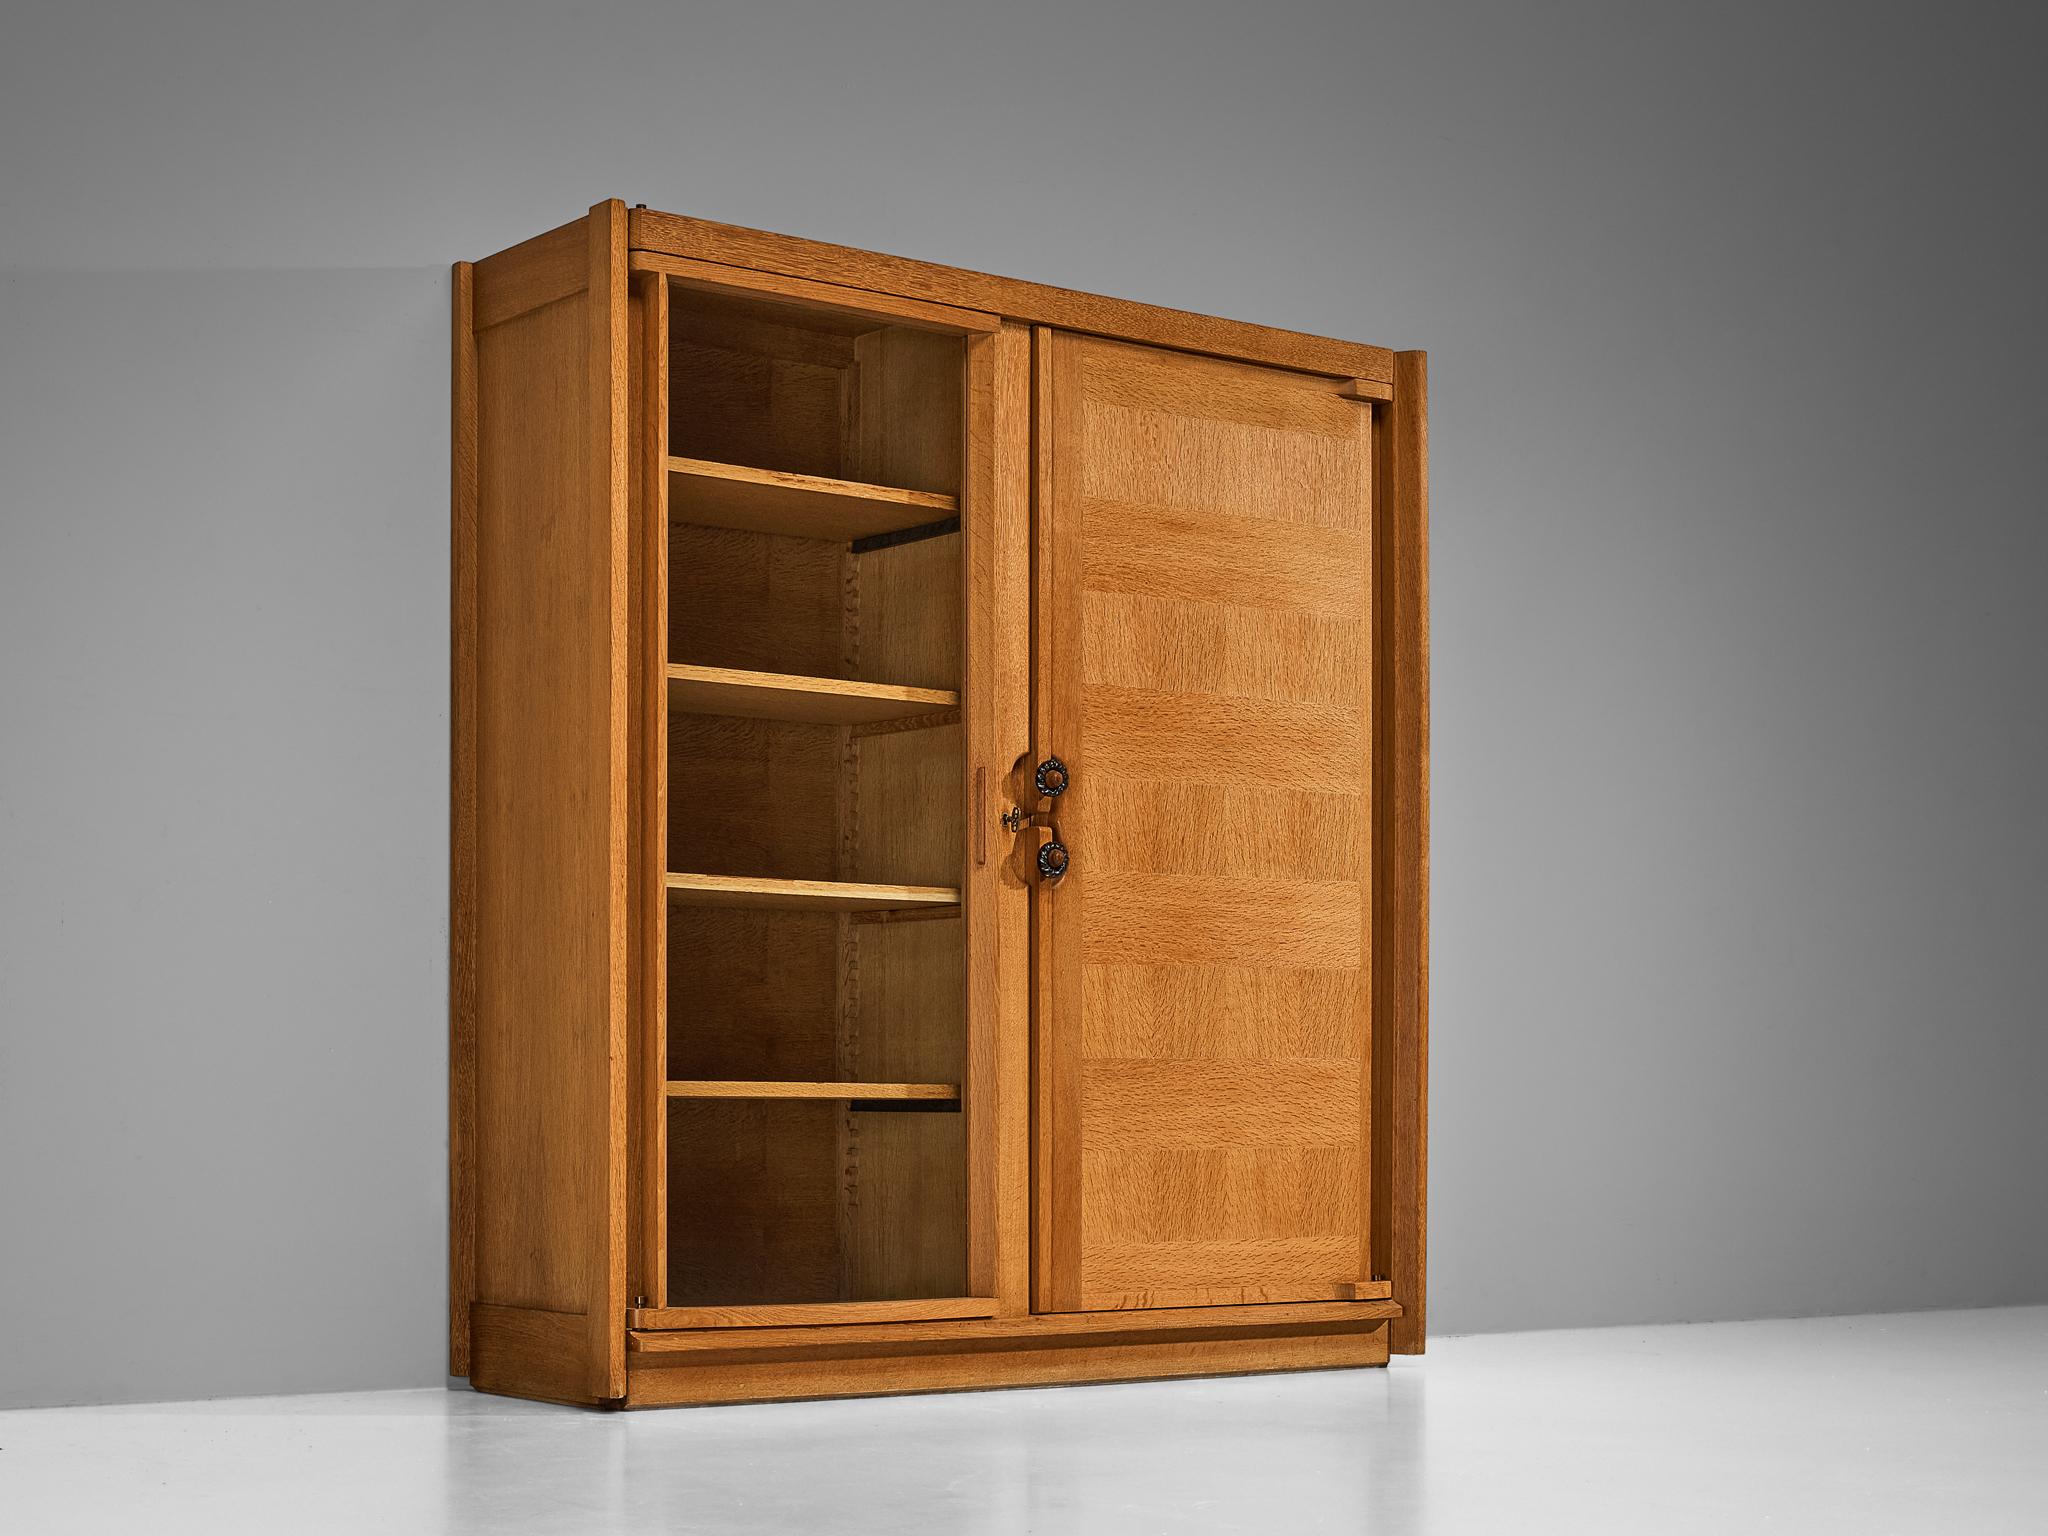 Guillerme et Chambron, highboard or cabinet, oak, glass, ceramic, France, 1960s

This wardrobe is based on a well-designed structure where aesthetics and functionally go hand in hand. The door panels have the characteristics of the French designer